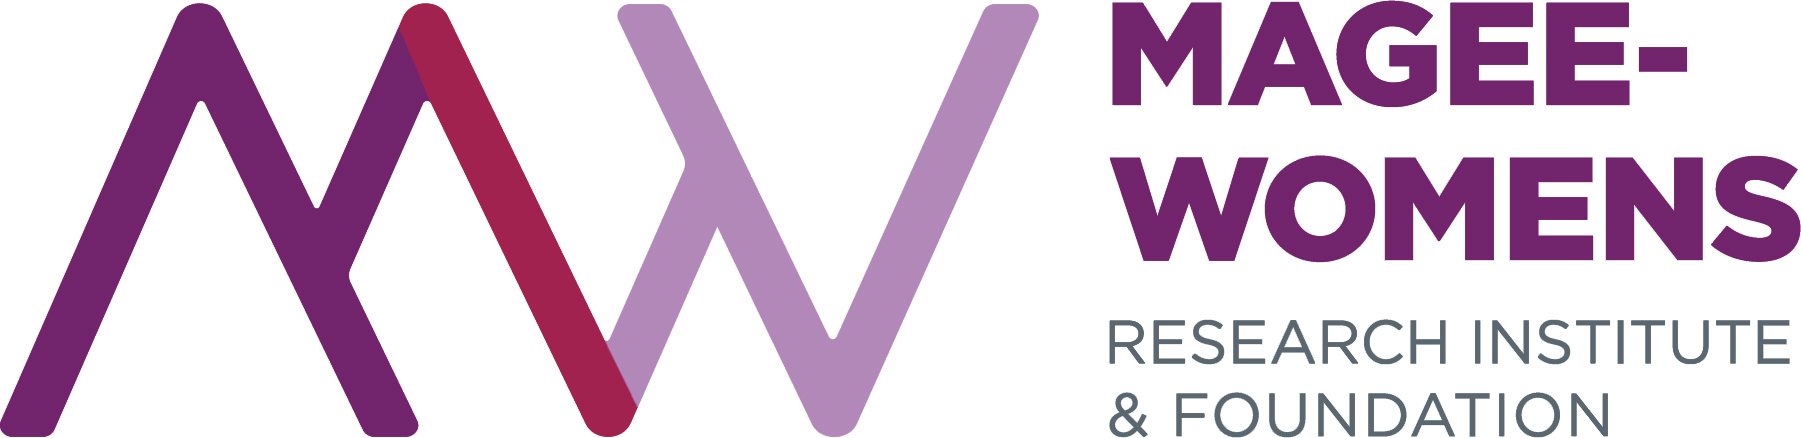 Magee-Womens Research Institute & Foundation logo